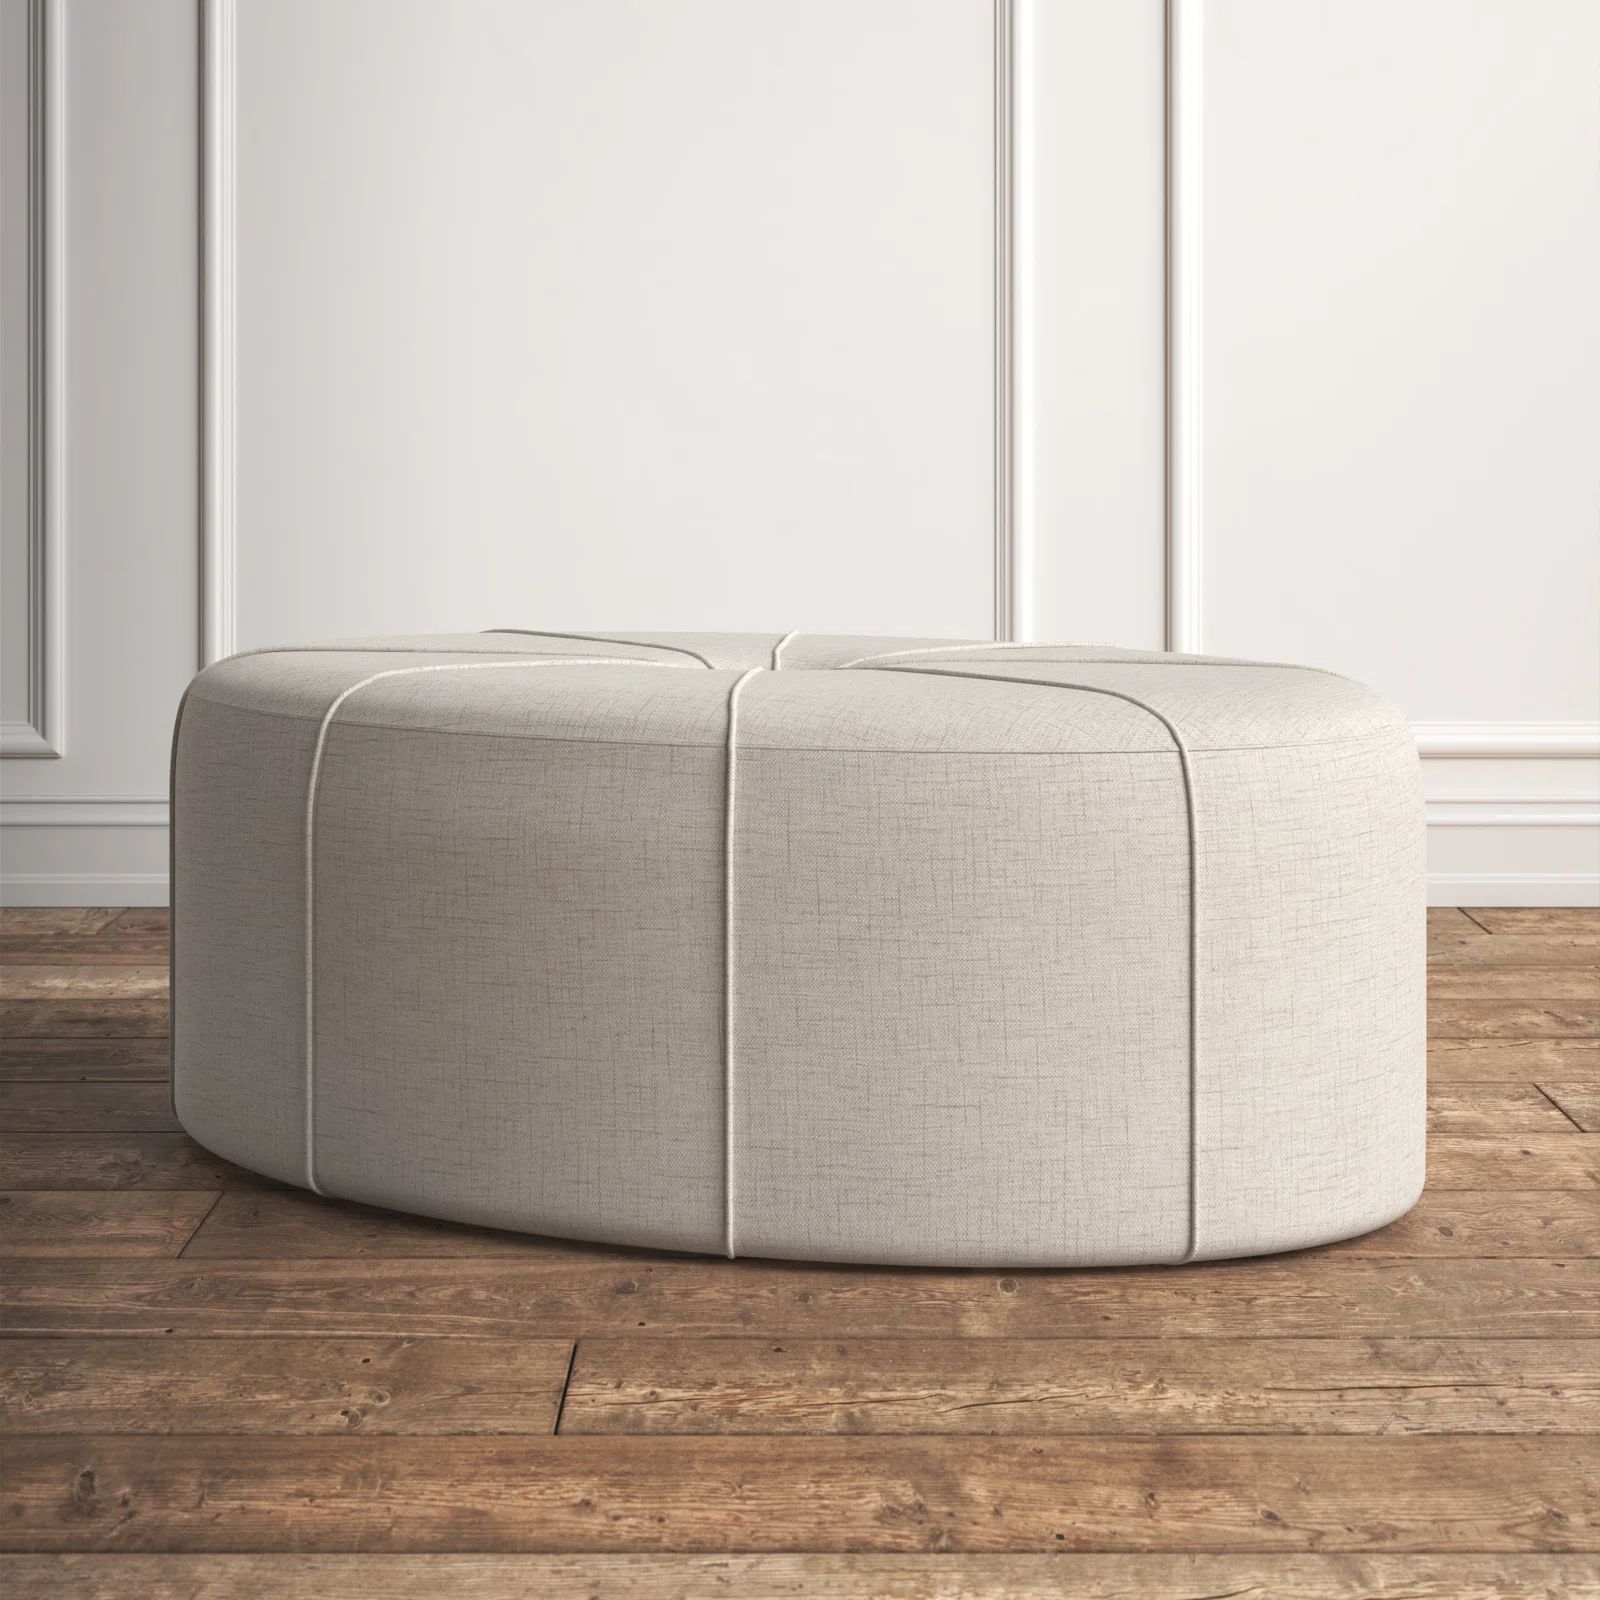 Christopher Tufted Oval Cocktail Ottoman | Wayfair Professional